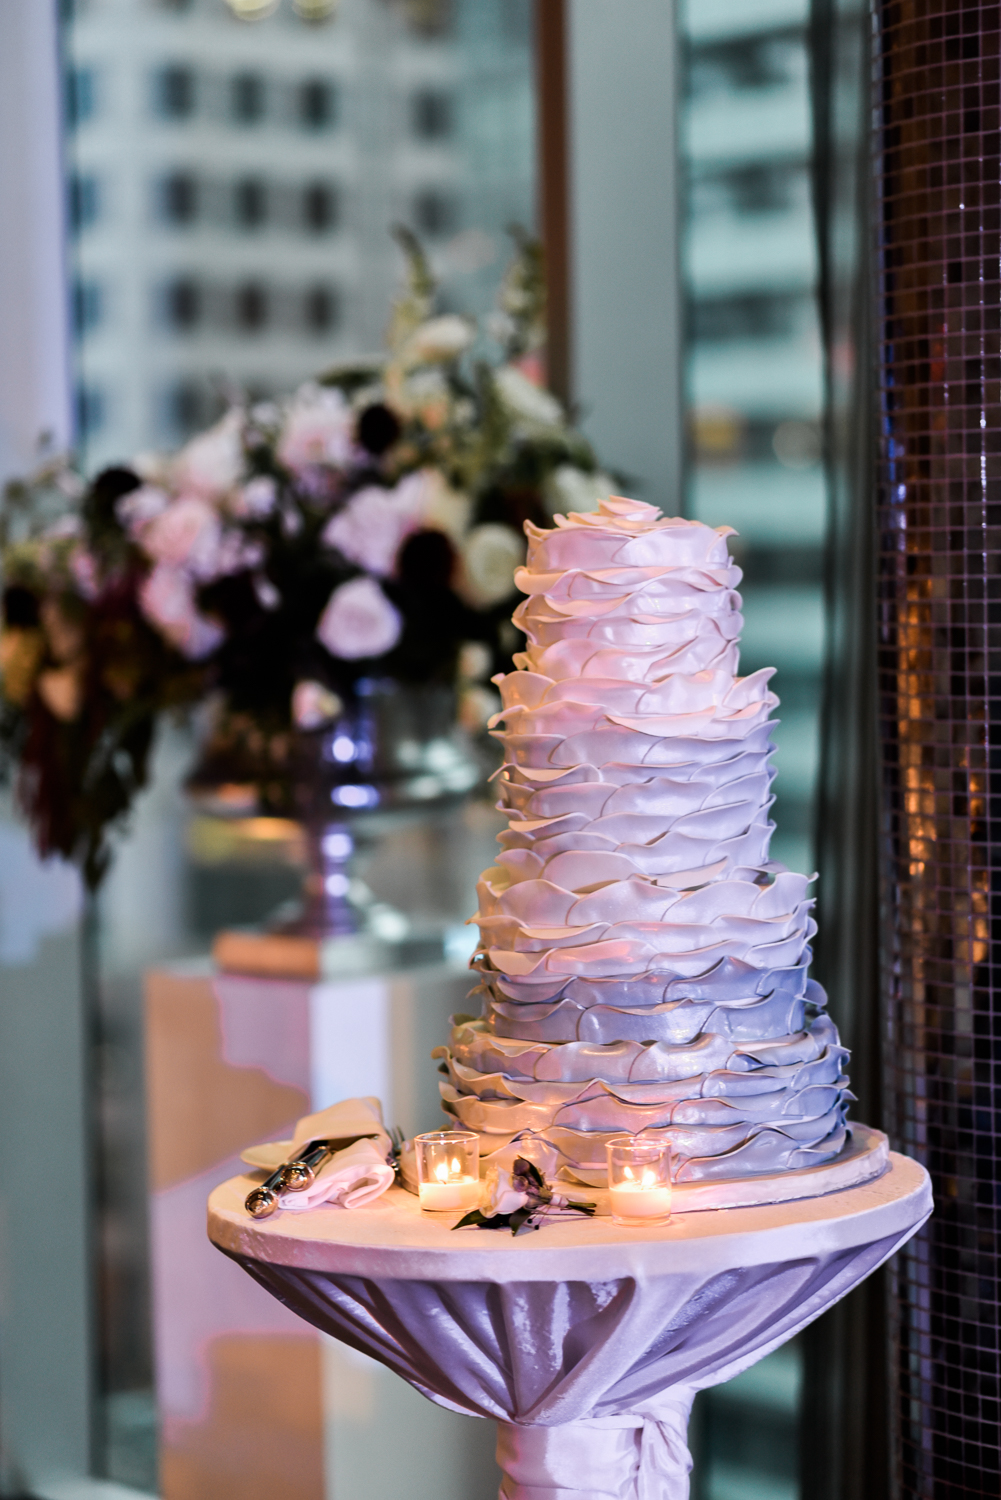 Photographed by Alix Gould, gorgeous tiered modern wedding cake